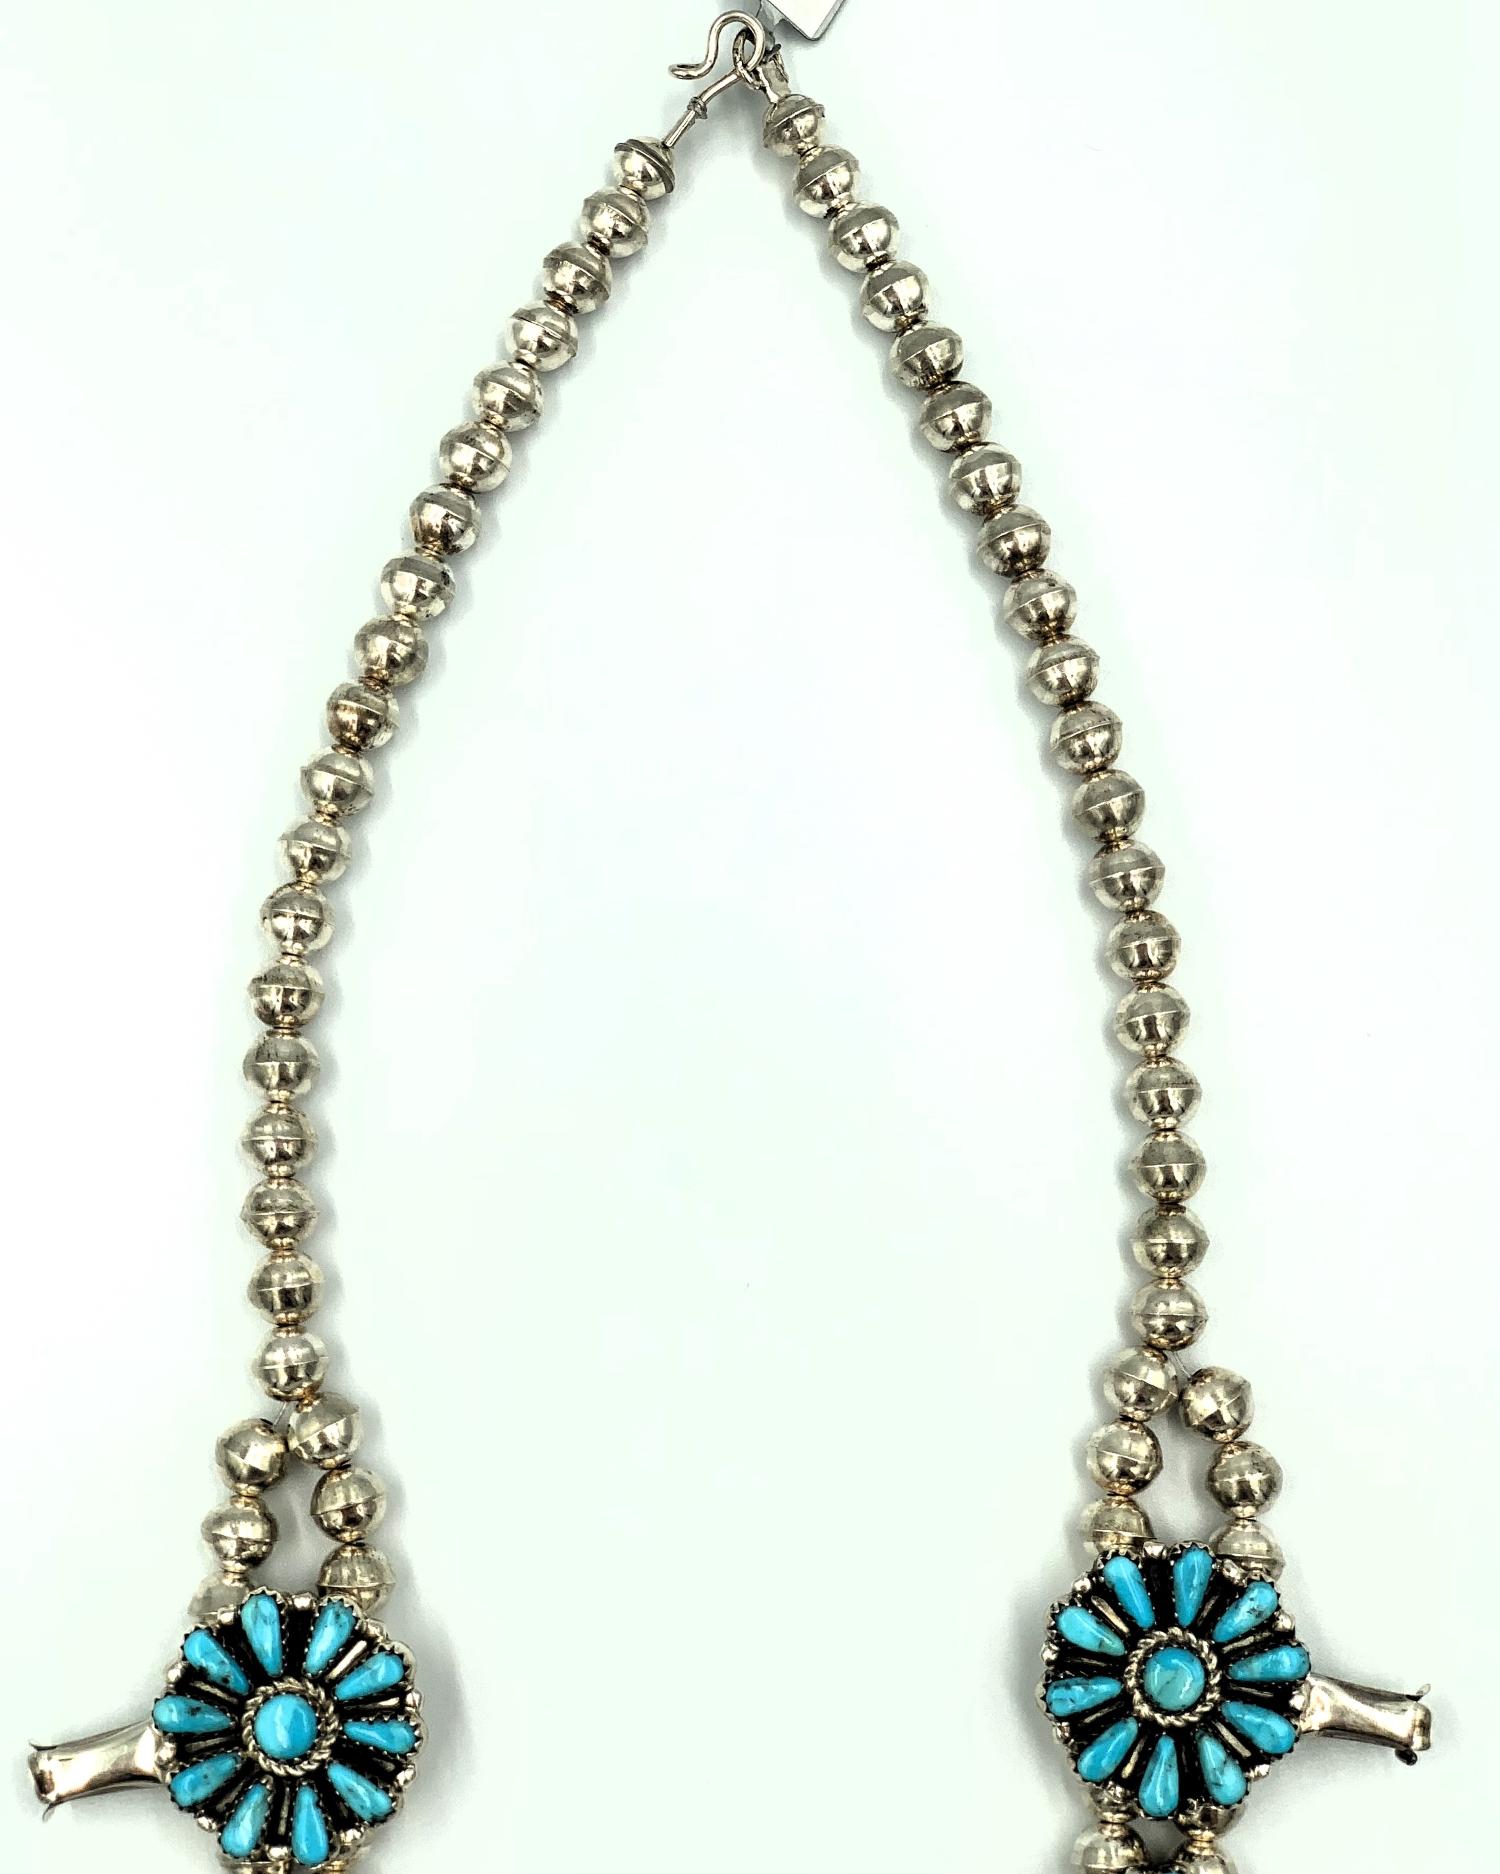 Sleeping Beauty Turquoise Squash Blossom Necklace and Earring Set by Violet Nez For Sale 1